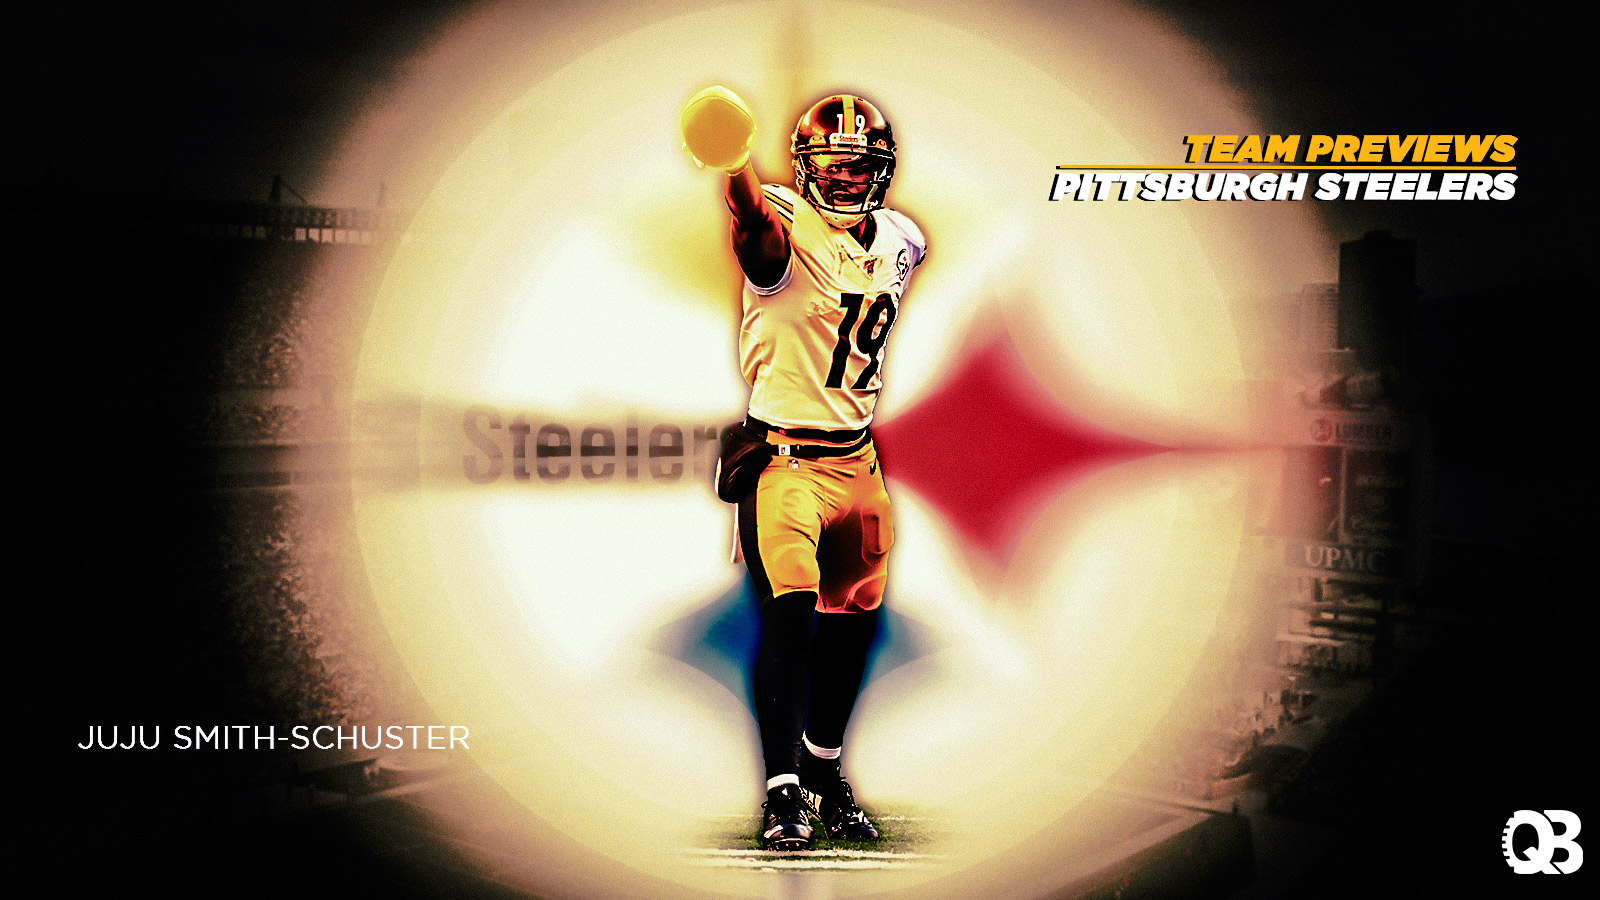 Rip WILL SMITH  Pittsburgh steelers wallpaper, Pittsburgh